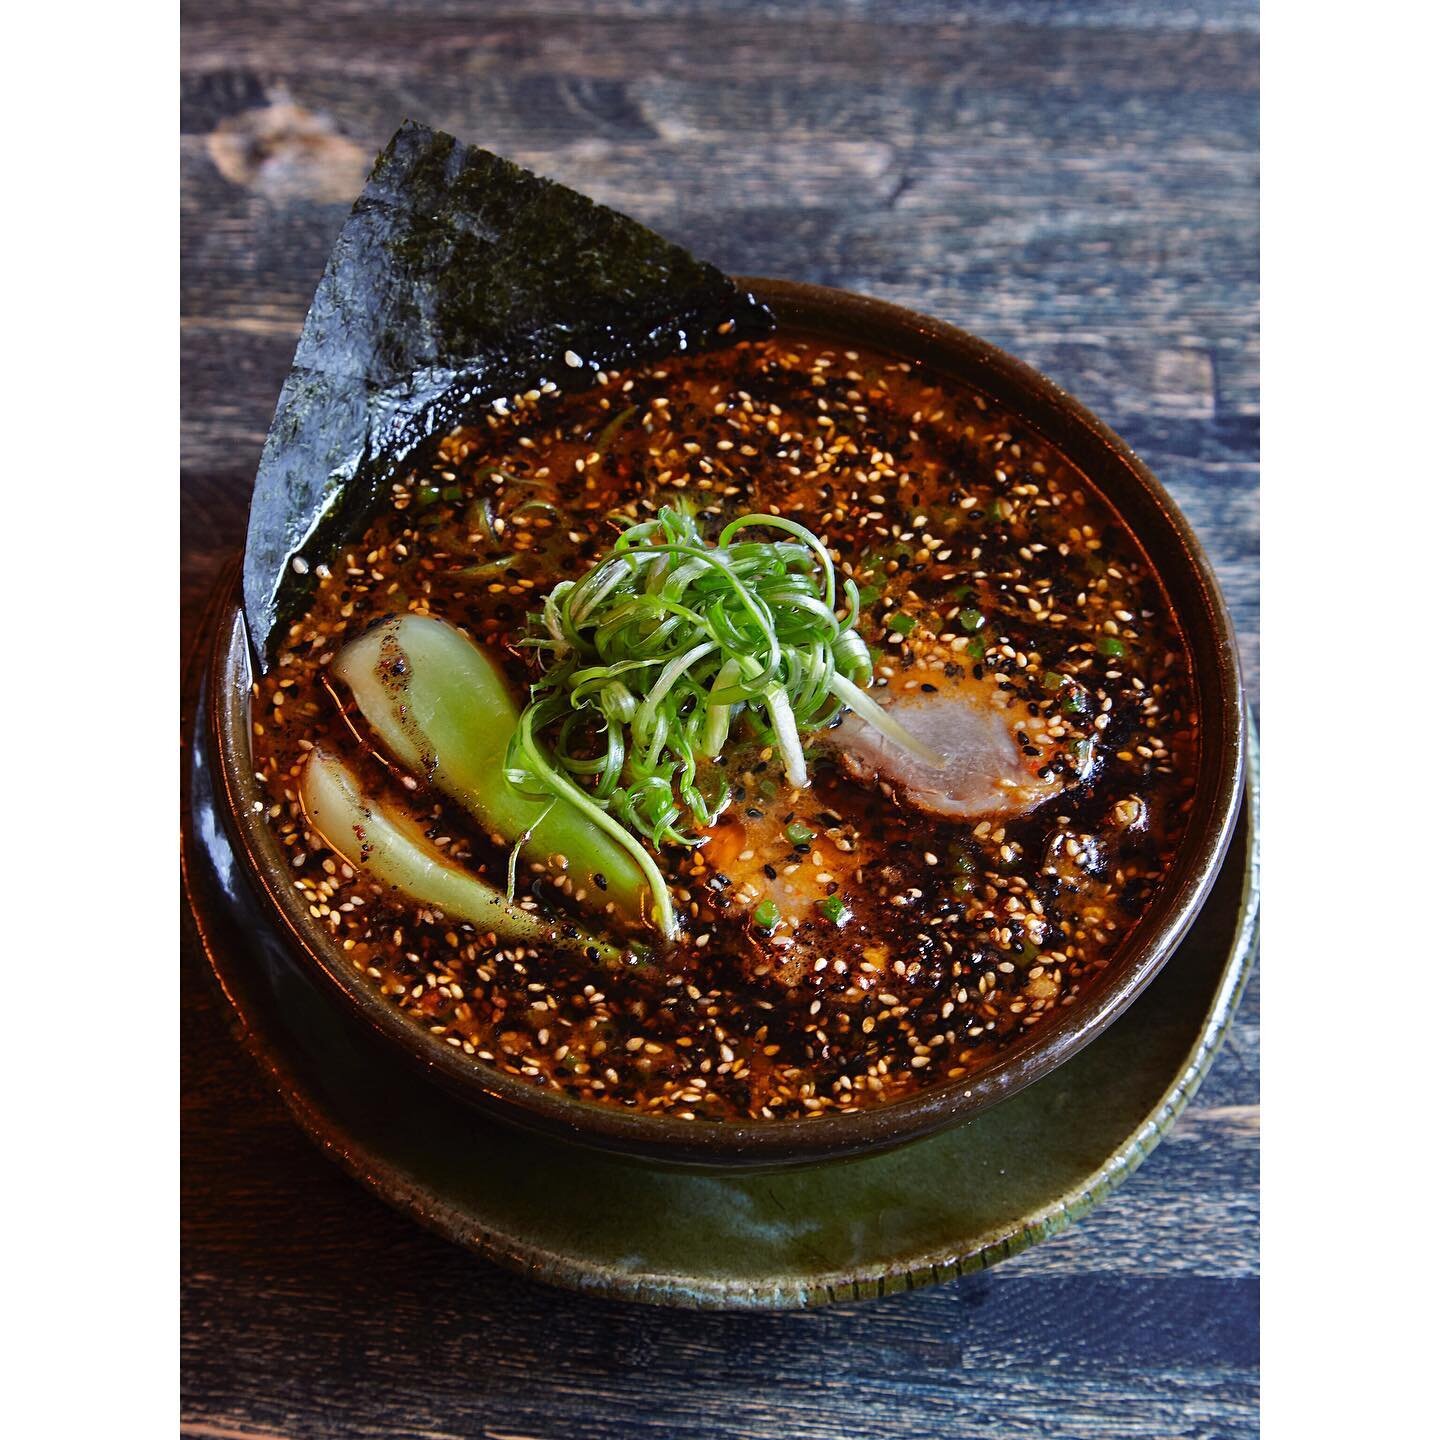 Spicy Goma Miso Ramen

It&rsquo;s a bit rainy today but our outdoor dining is in full swing! (we have roofs🙌🏻) Our Spicy Goma Miso Ramen is perfect for a nice and chilly Sunday.

#sesame #miso #ramenlover

Now we&rsquo;re serving a full menu for ou